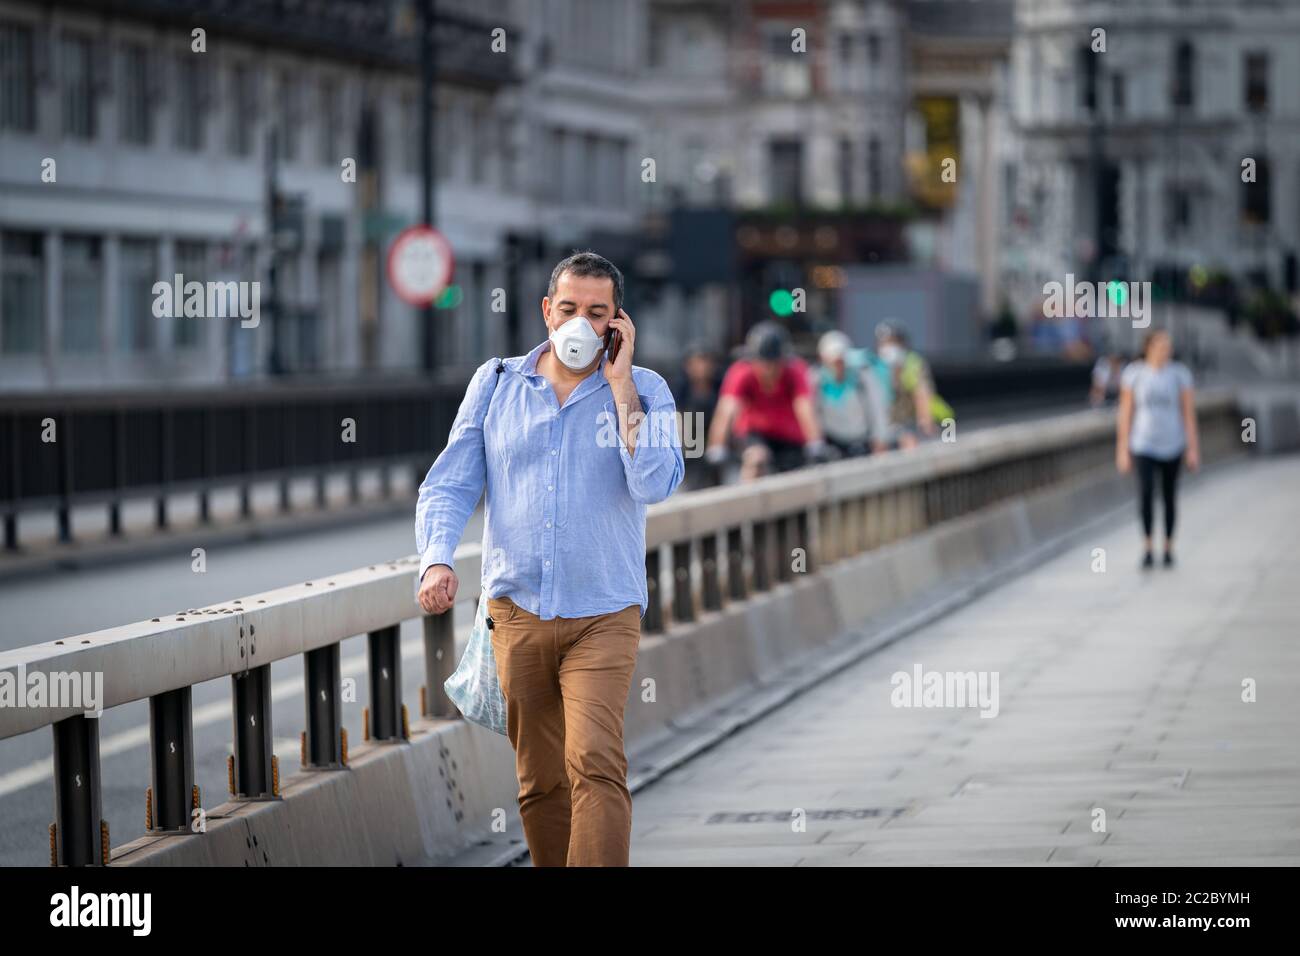 LONDON, ENGLAND - MAY 27, 2020: Middle aged Middle Eastern man walking along Waterloo Bridge in London, England wearing a face mask and talking on his Stock Photo